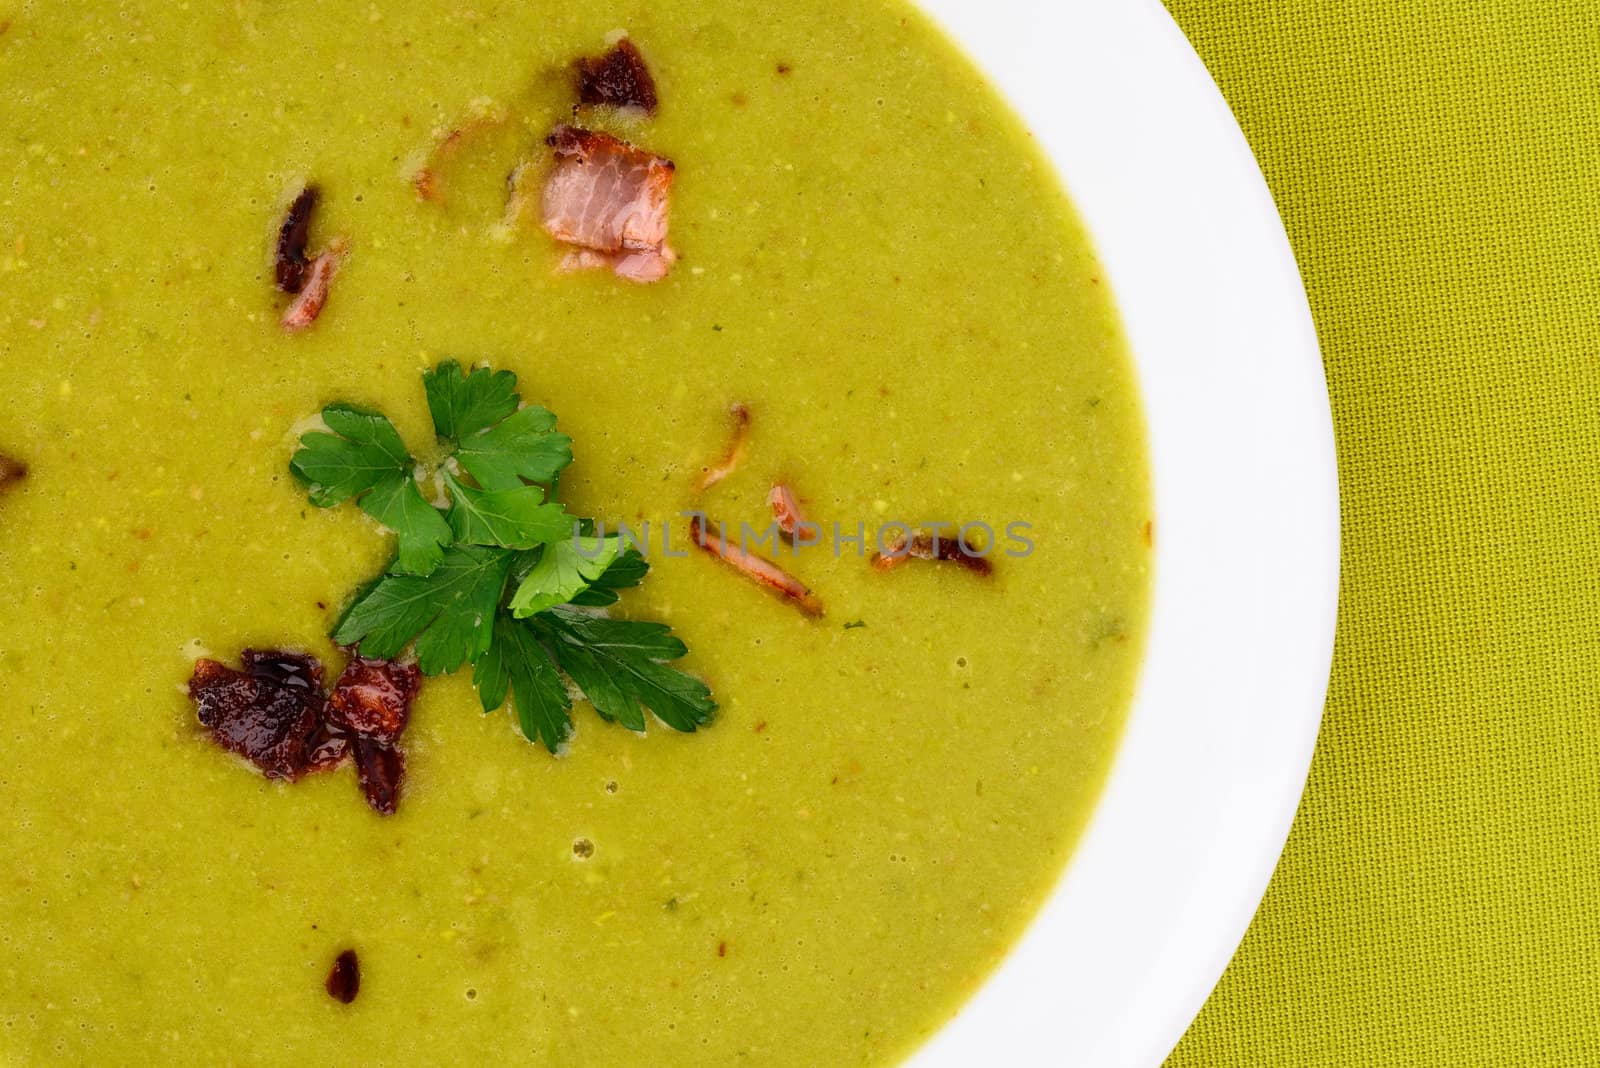 Pea soup with small pieces of bacon.